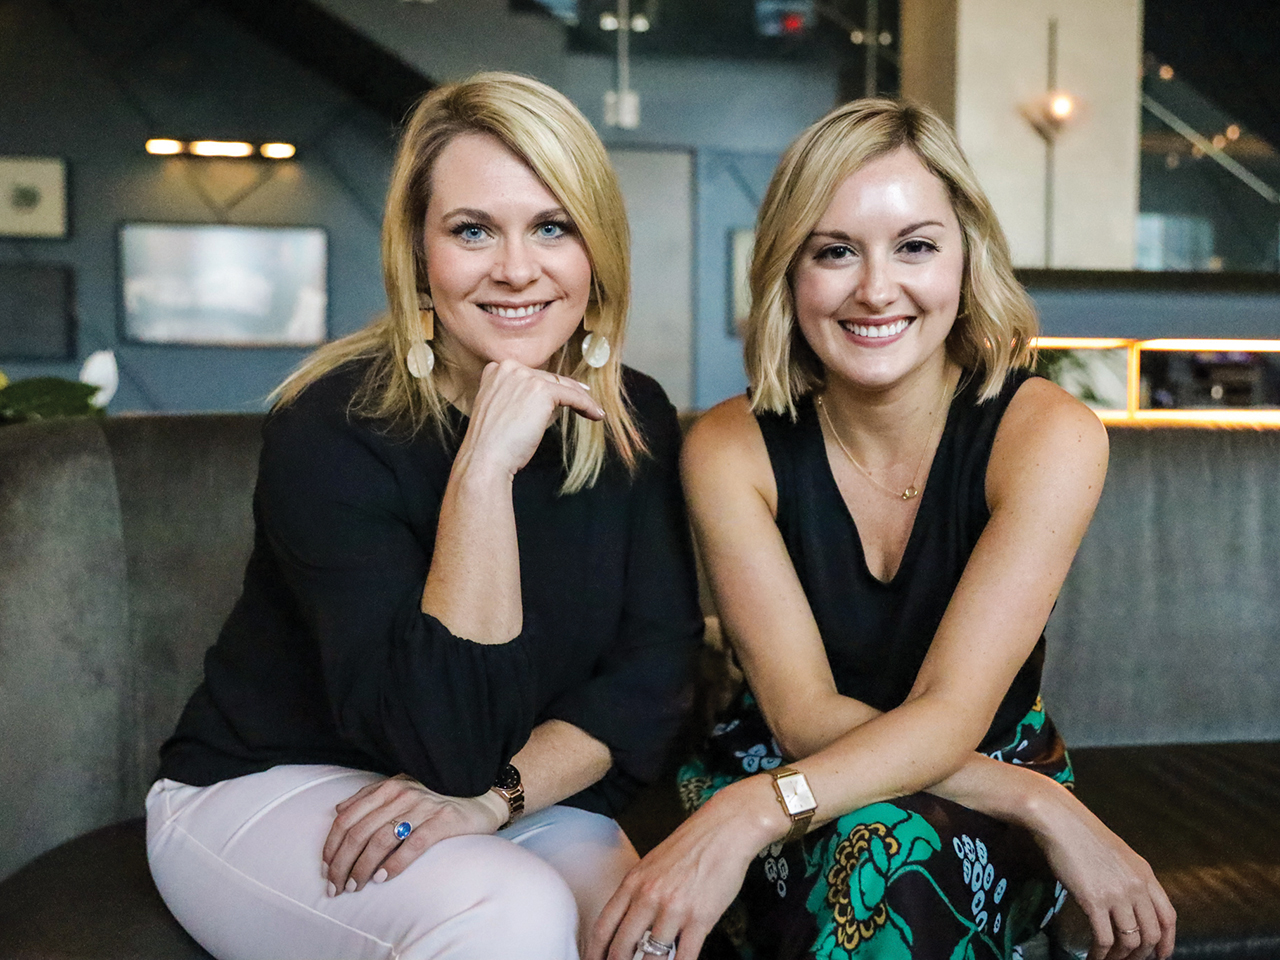 Meghan Newell and Caroline Dove: Two Inspiring Women in Business